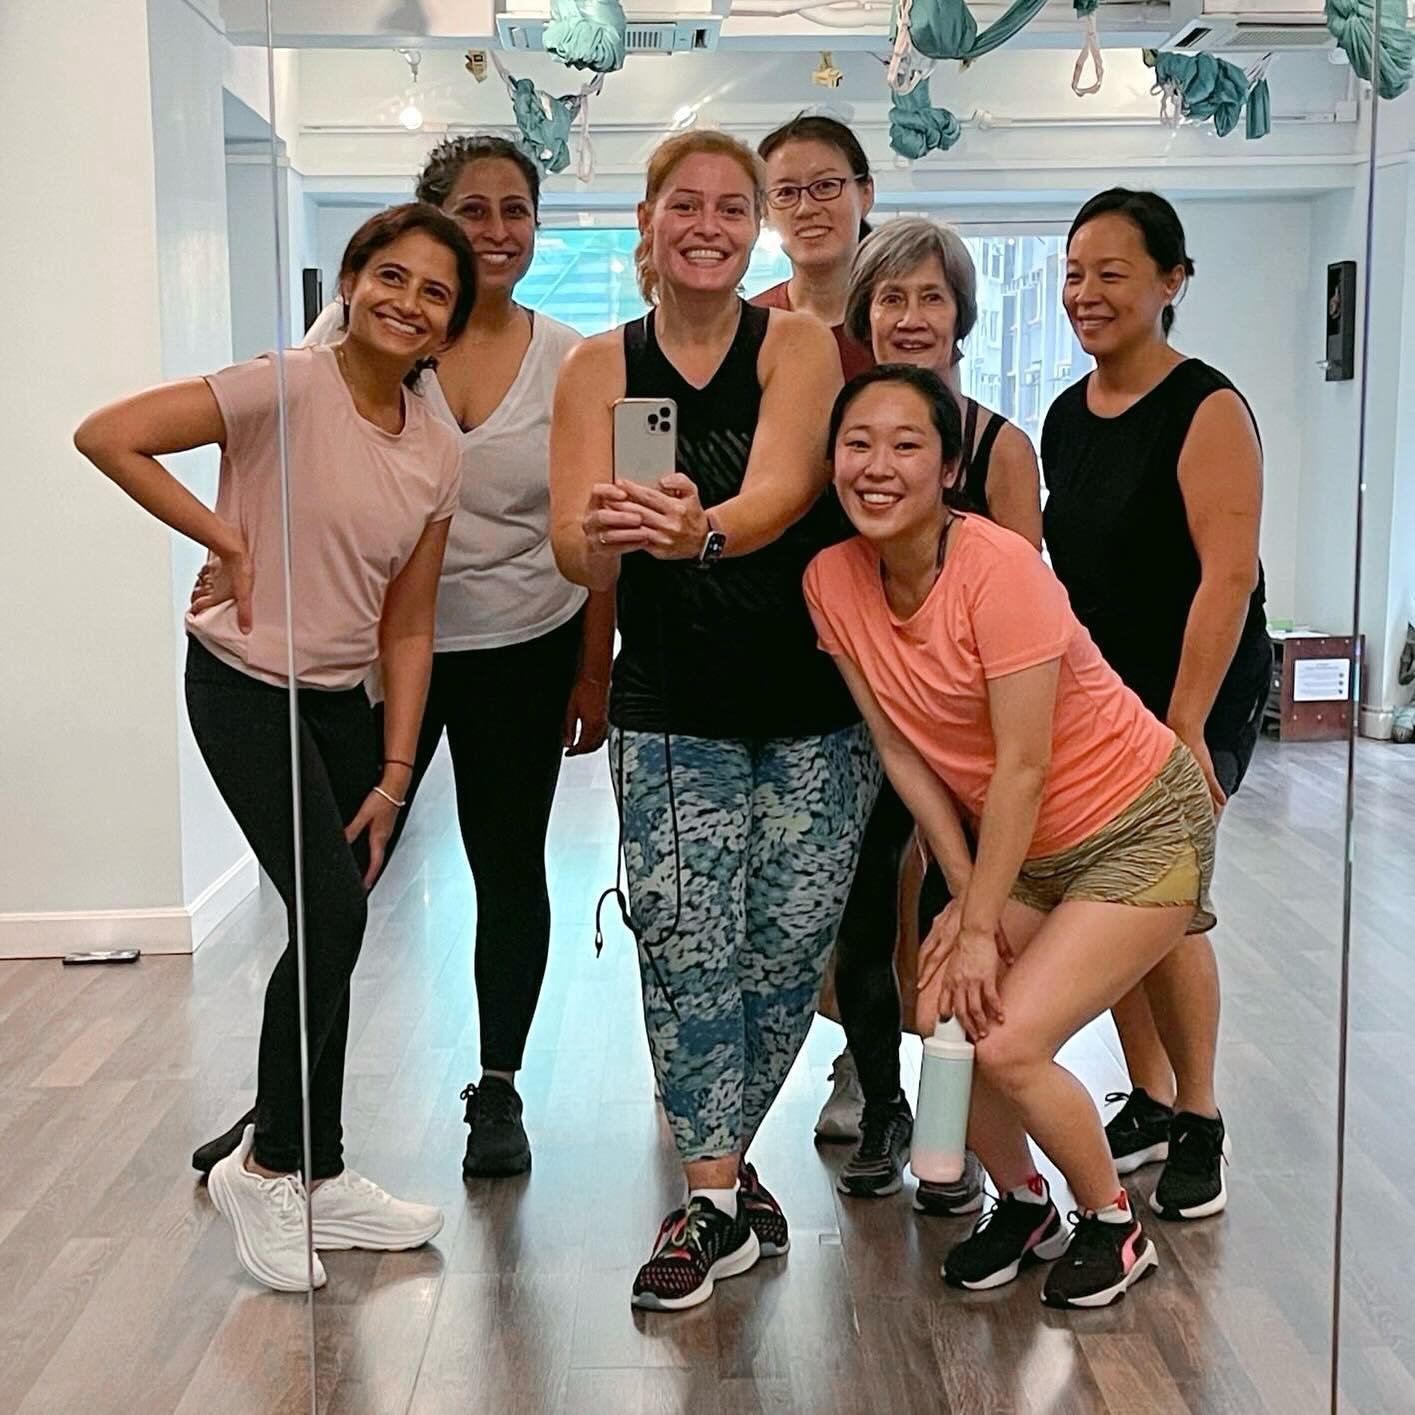 ✨NEW TIME SLOT ADDED✨ Zumba Dance with Luci is perfect for every body💃🏻

👉🏻 Wednesday 12:30-1:30pm
👉🏻 Saturday 3-4pm (Starting from 25 May!)

Luci 的 Zumba 課讓您體驗有趣而充滿活力的舞蹈鍛煉，在熱情洋溢的音樂中，跳躍、旋轉和放鬆自己。

Having already taught in Brazil, Germany and in 